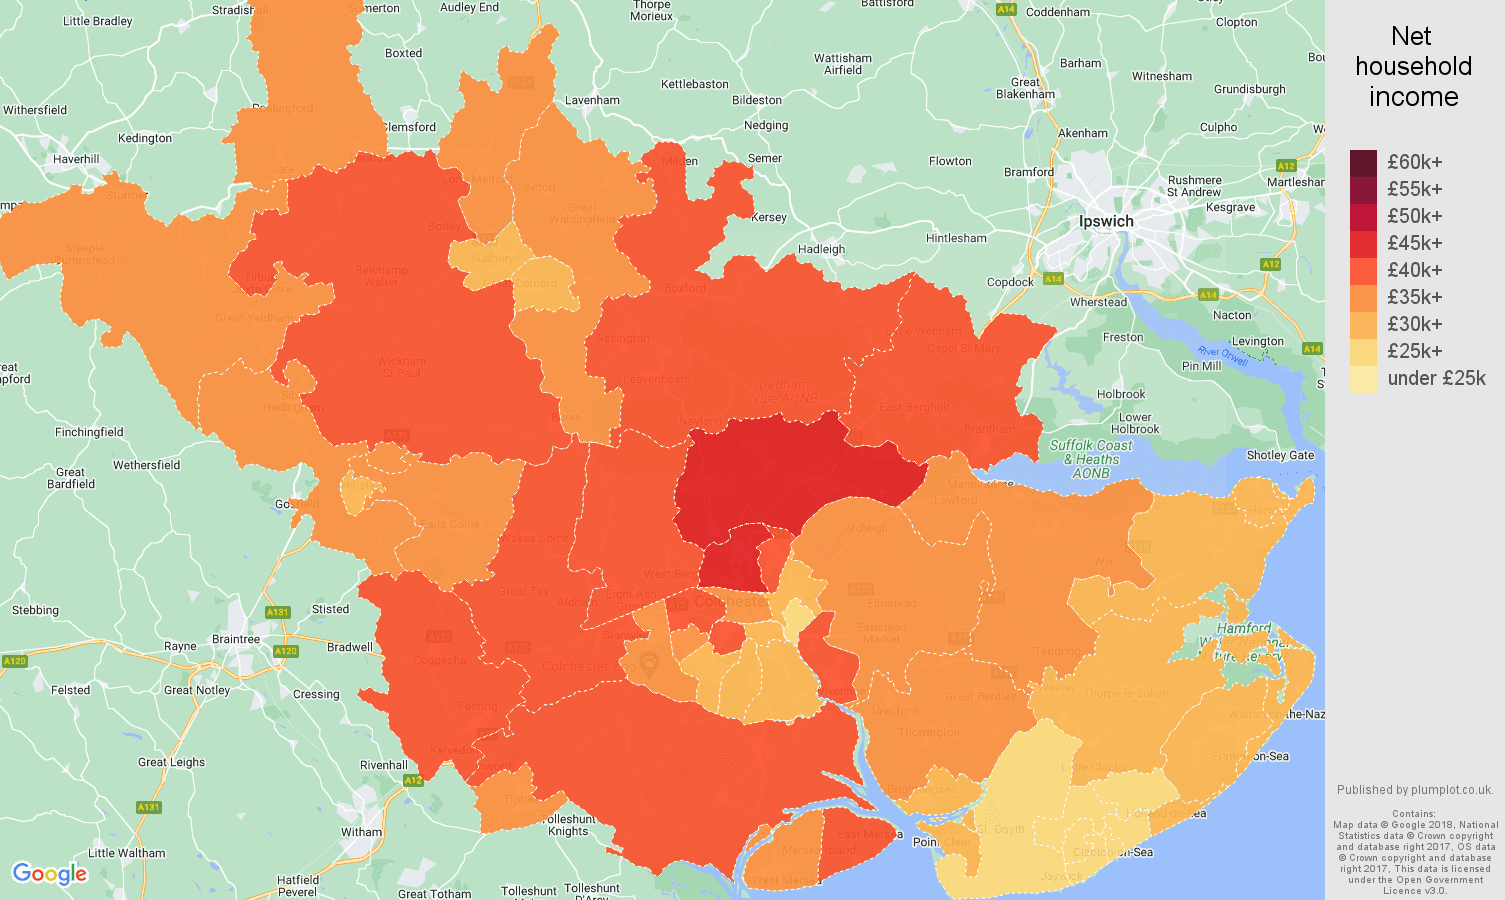 Colchester net household income map